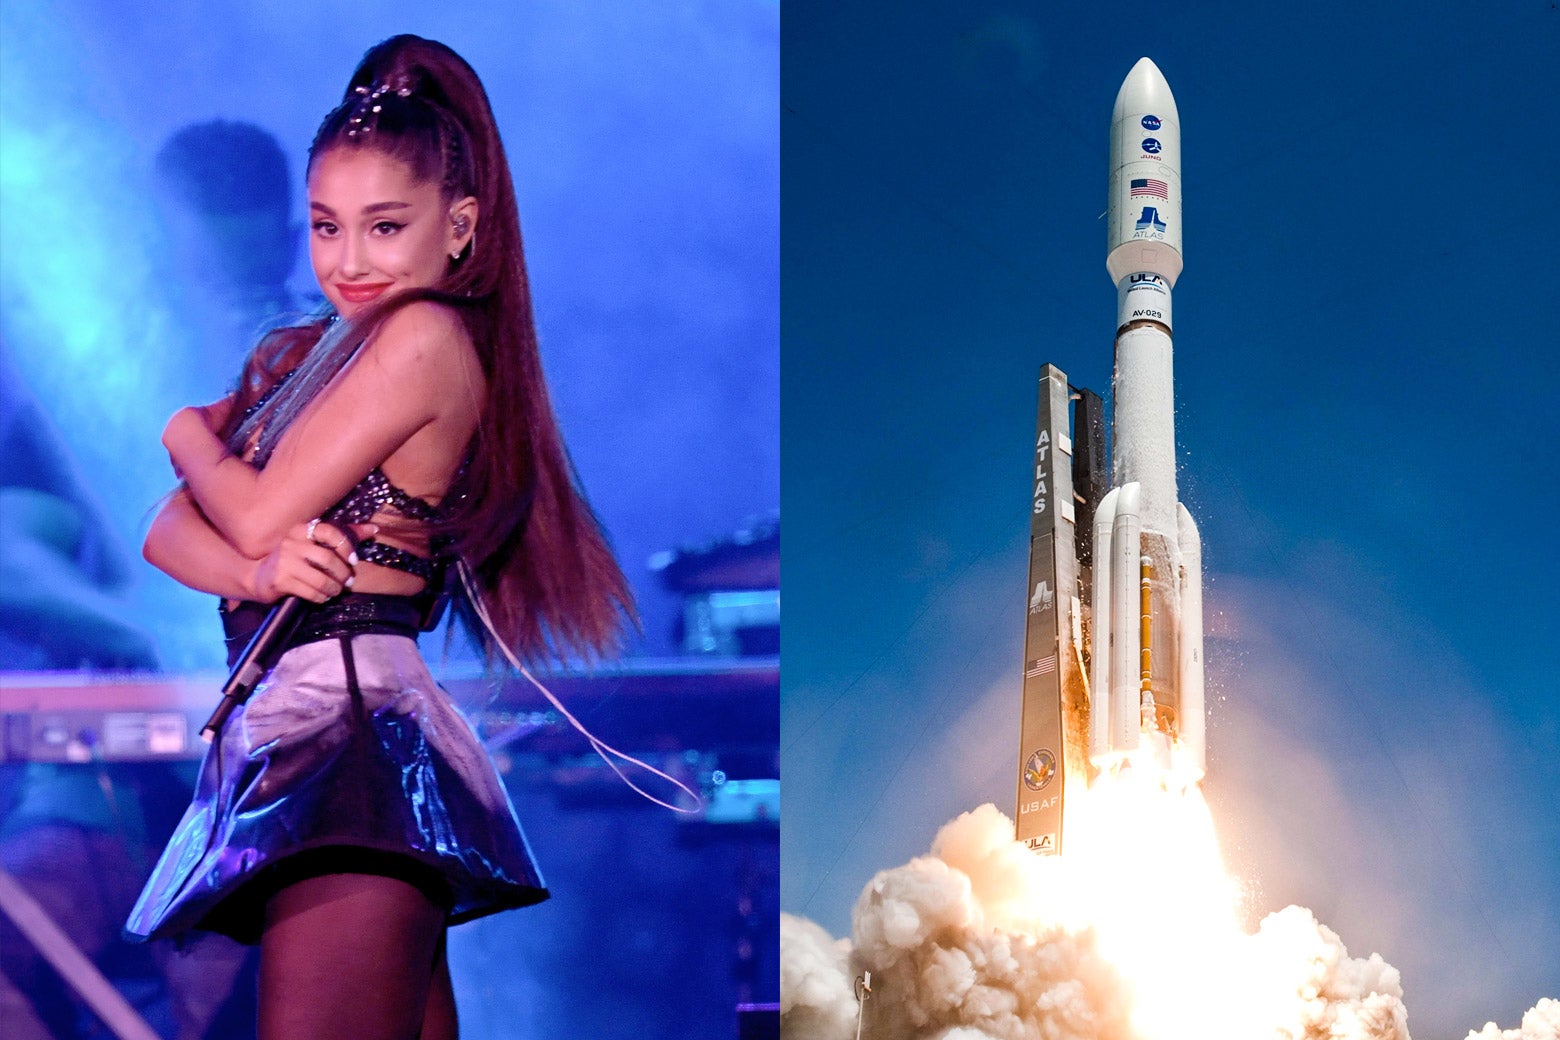 Ariana Grande performs onstage and a NASA rocket taking off.